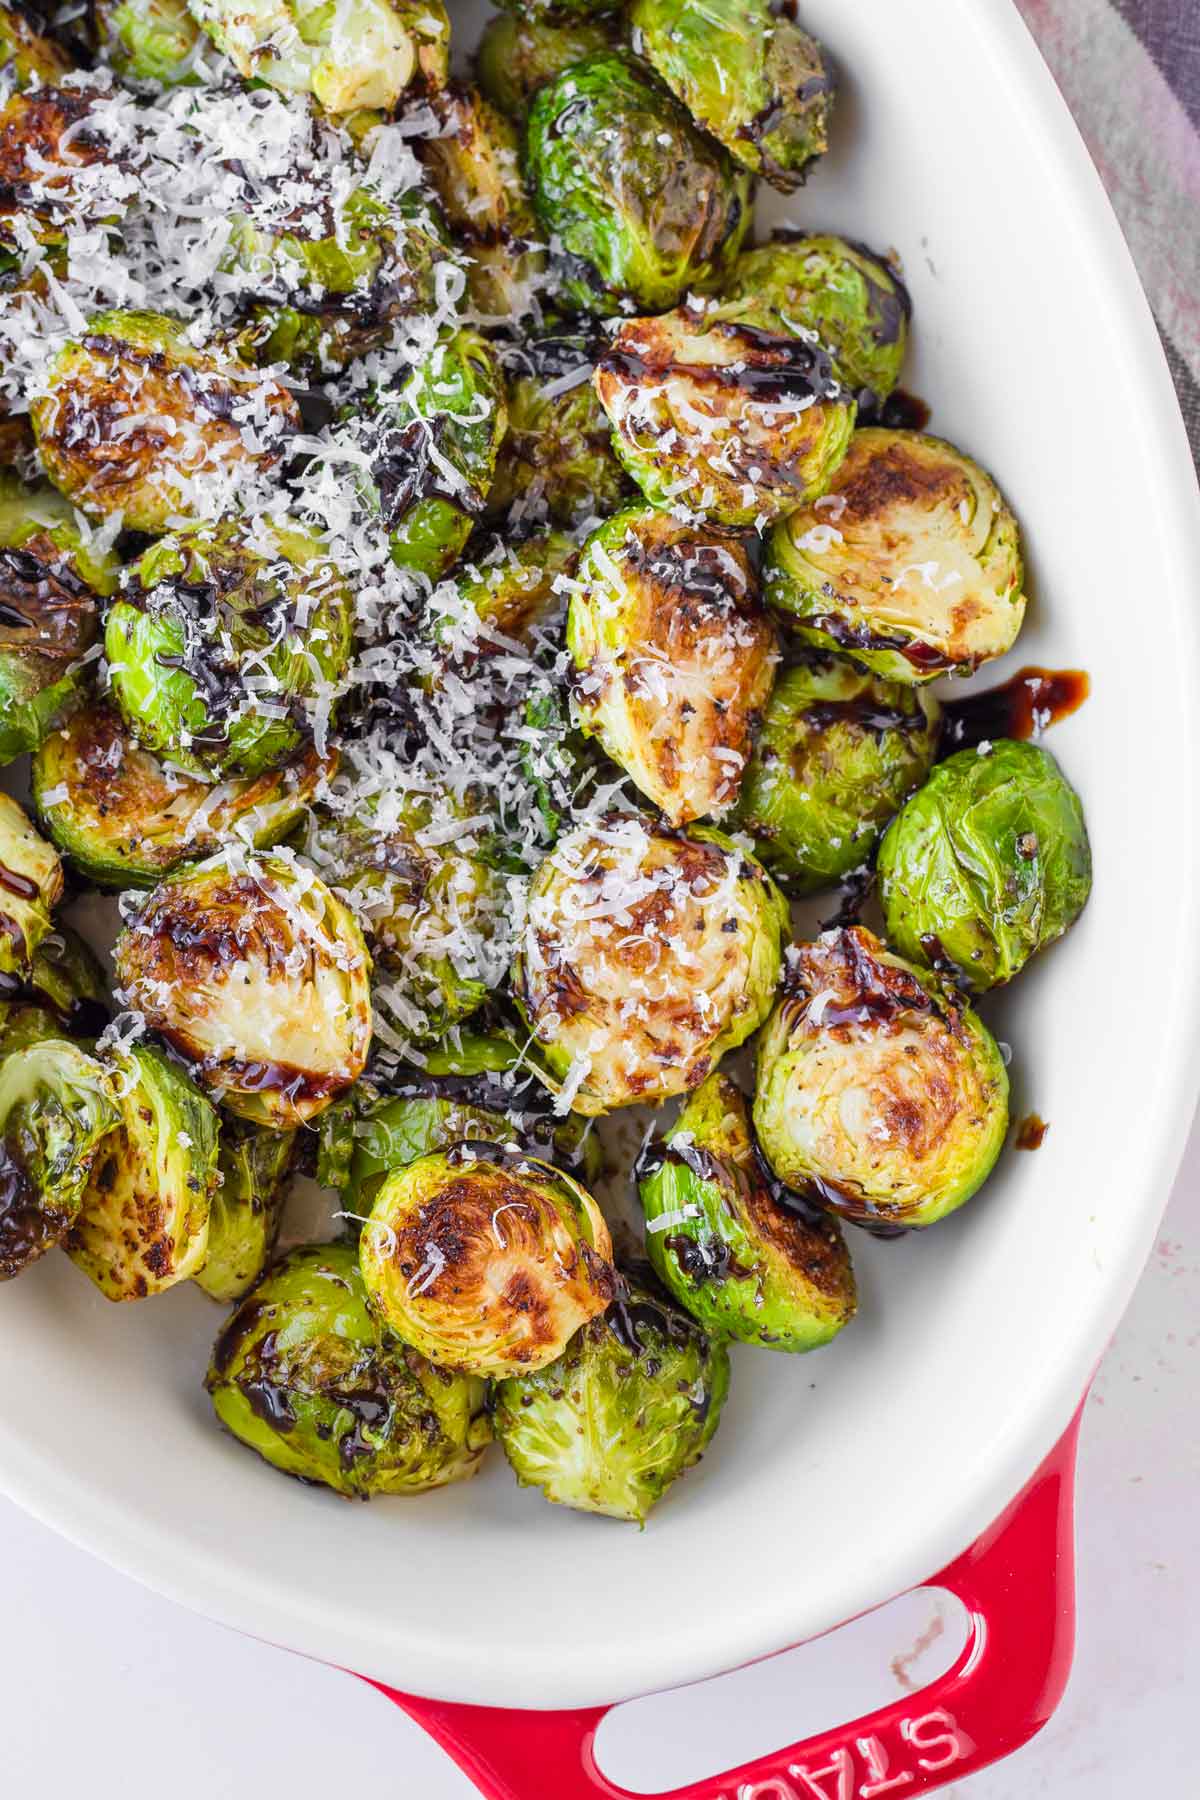 roasted brussels sprouts with glaze and parmesan in oval dish